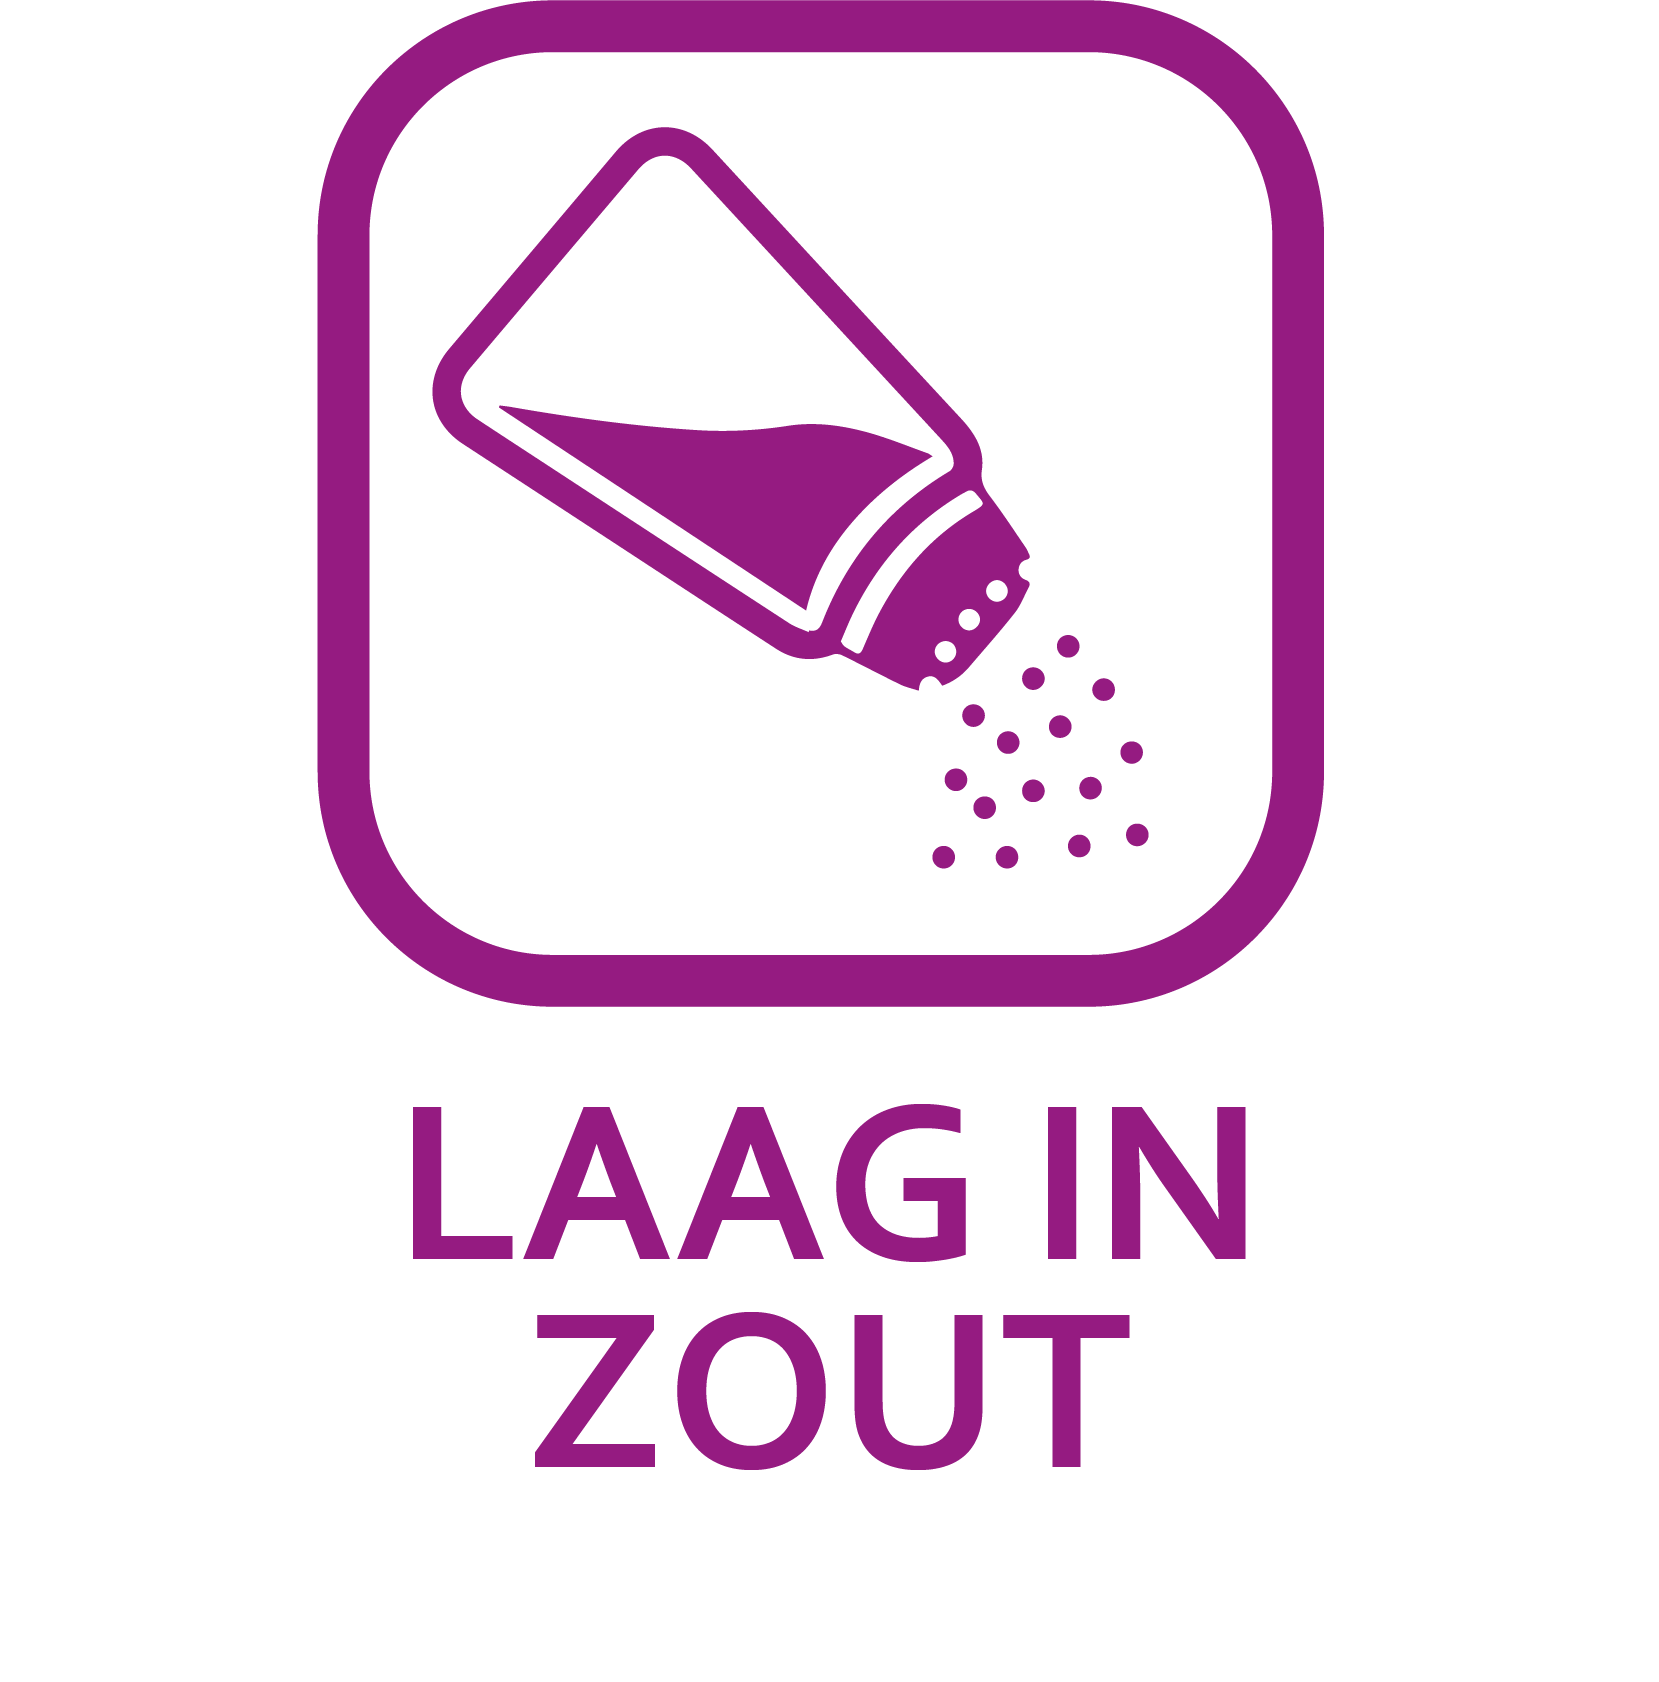 Laag in zout